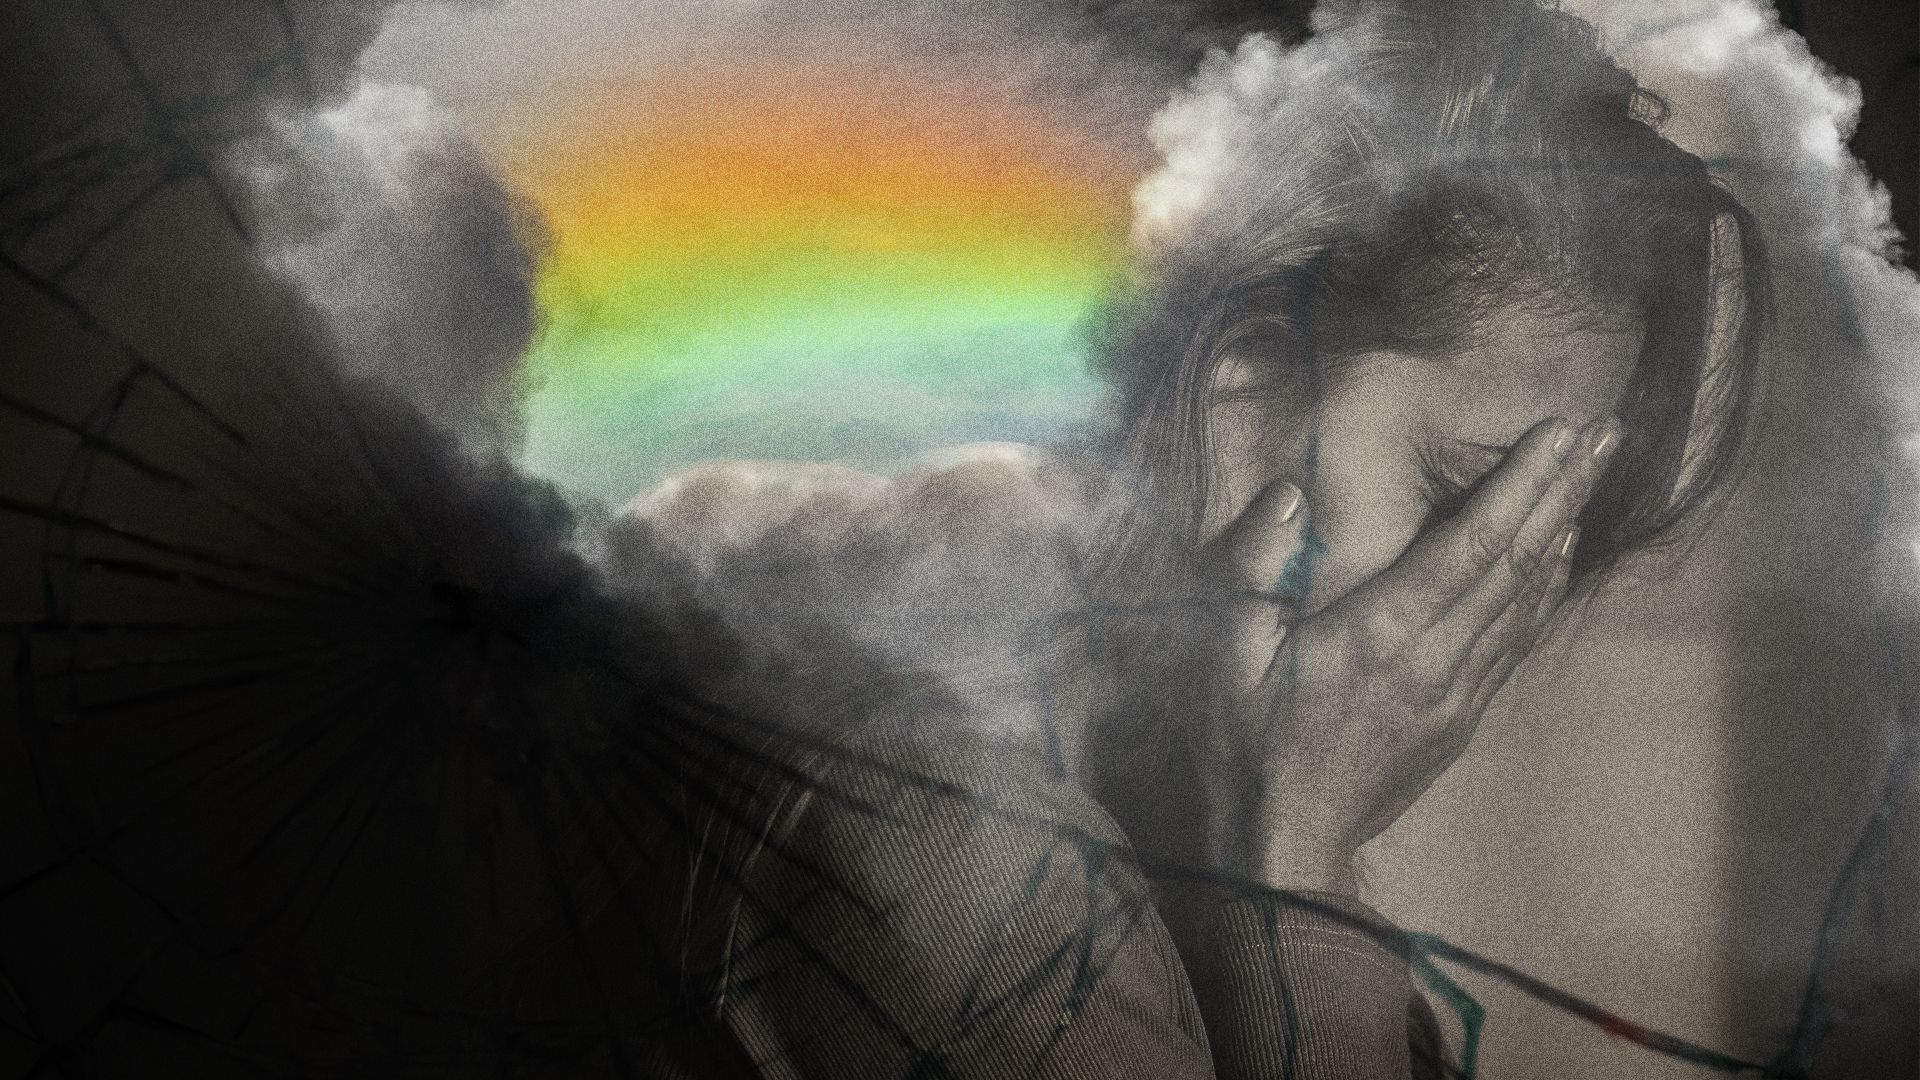 Photo illustration collage of an upset young person with a rainbow and shattered glass surrounding them.